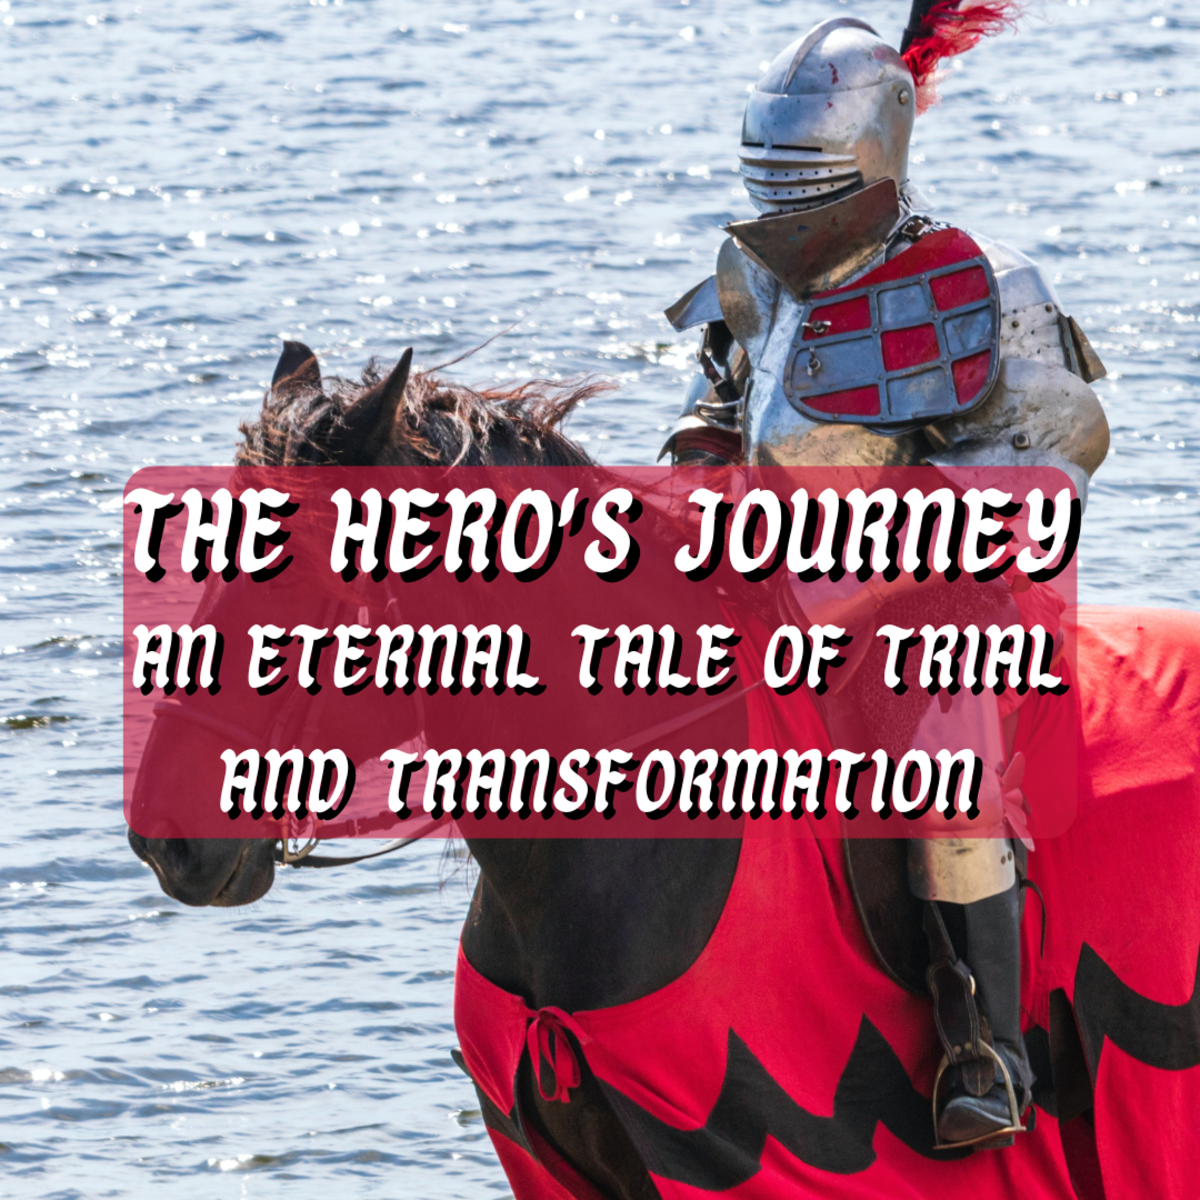 The Hero's Journey: An Eternal Tale of Trial and Transformation